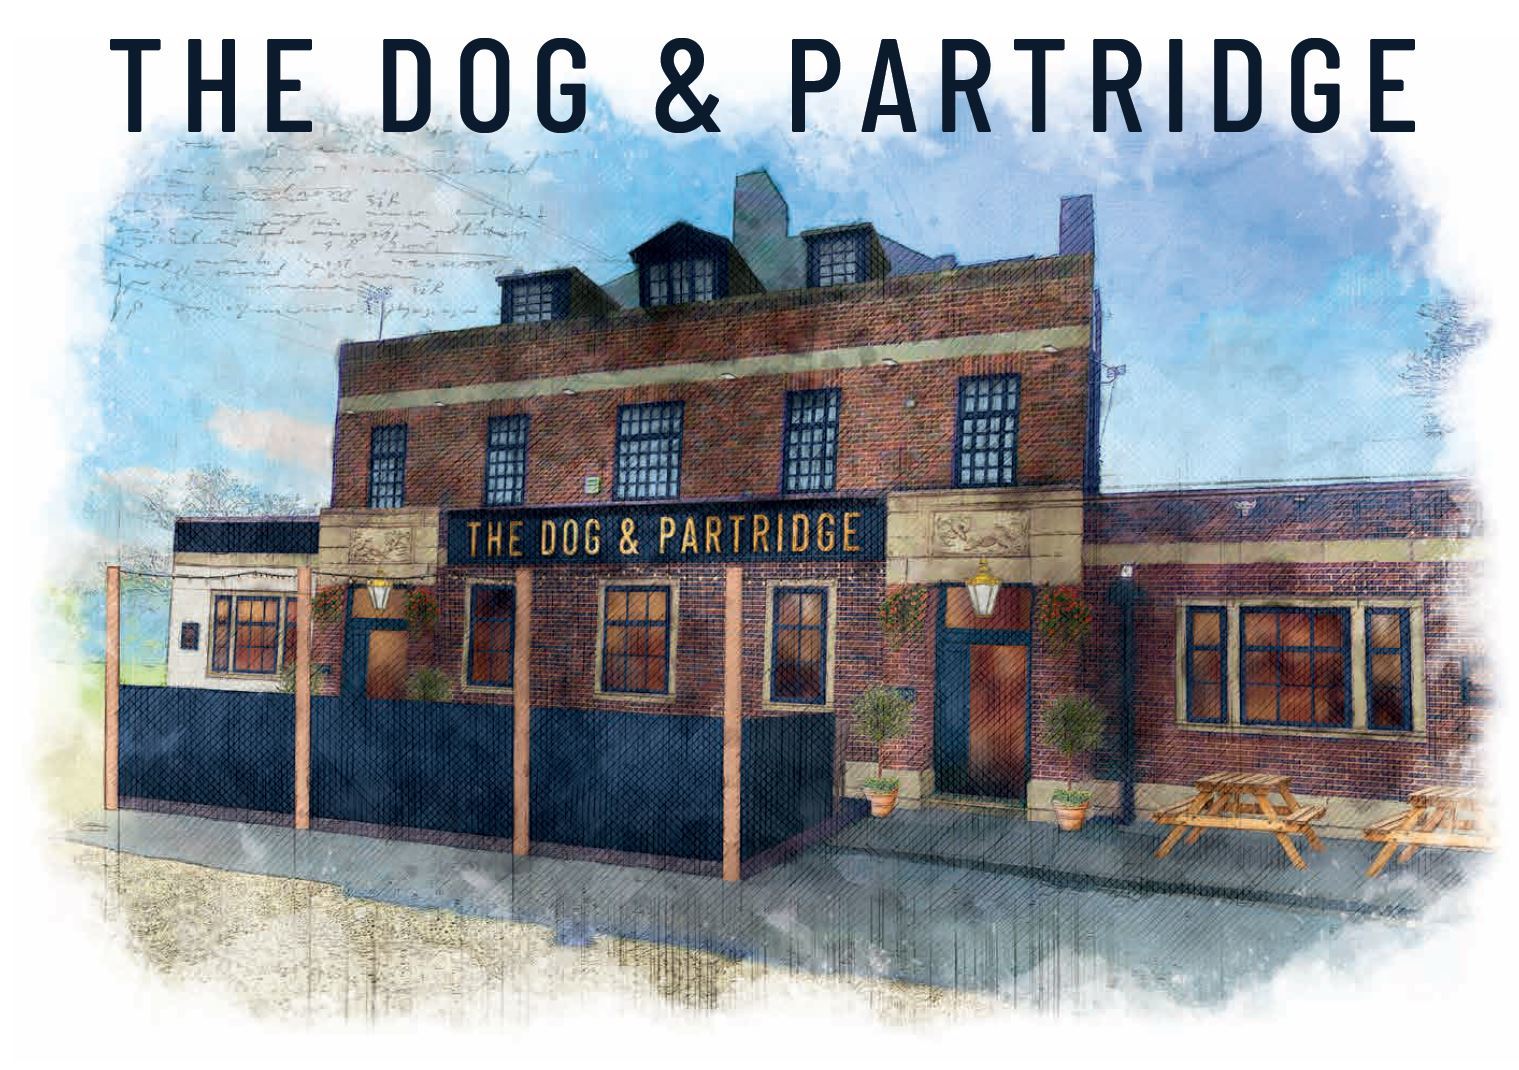 Drawings of planned upgrades to the pib. Pictures: The Dog and Partridge